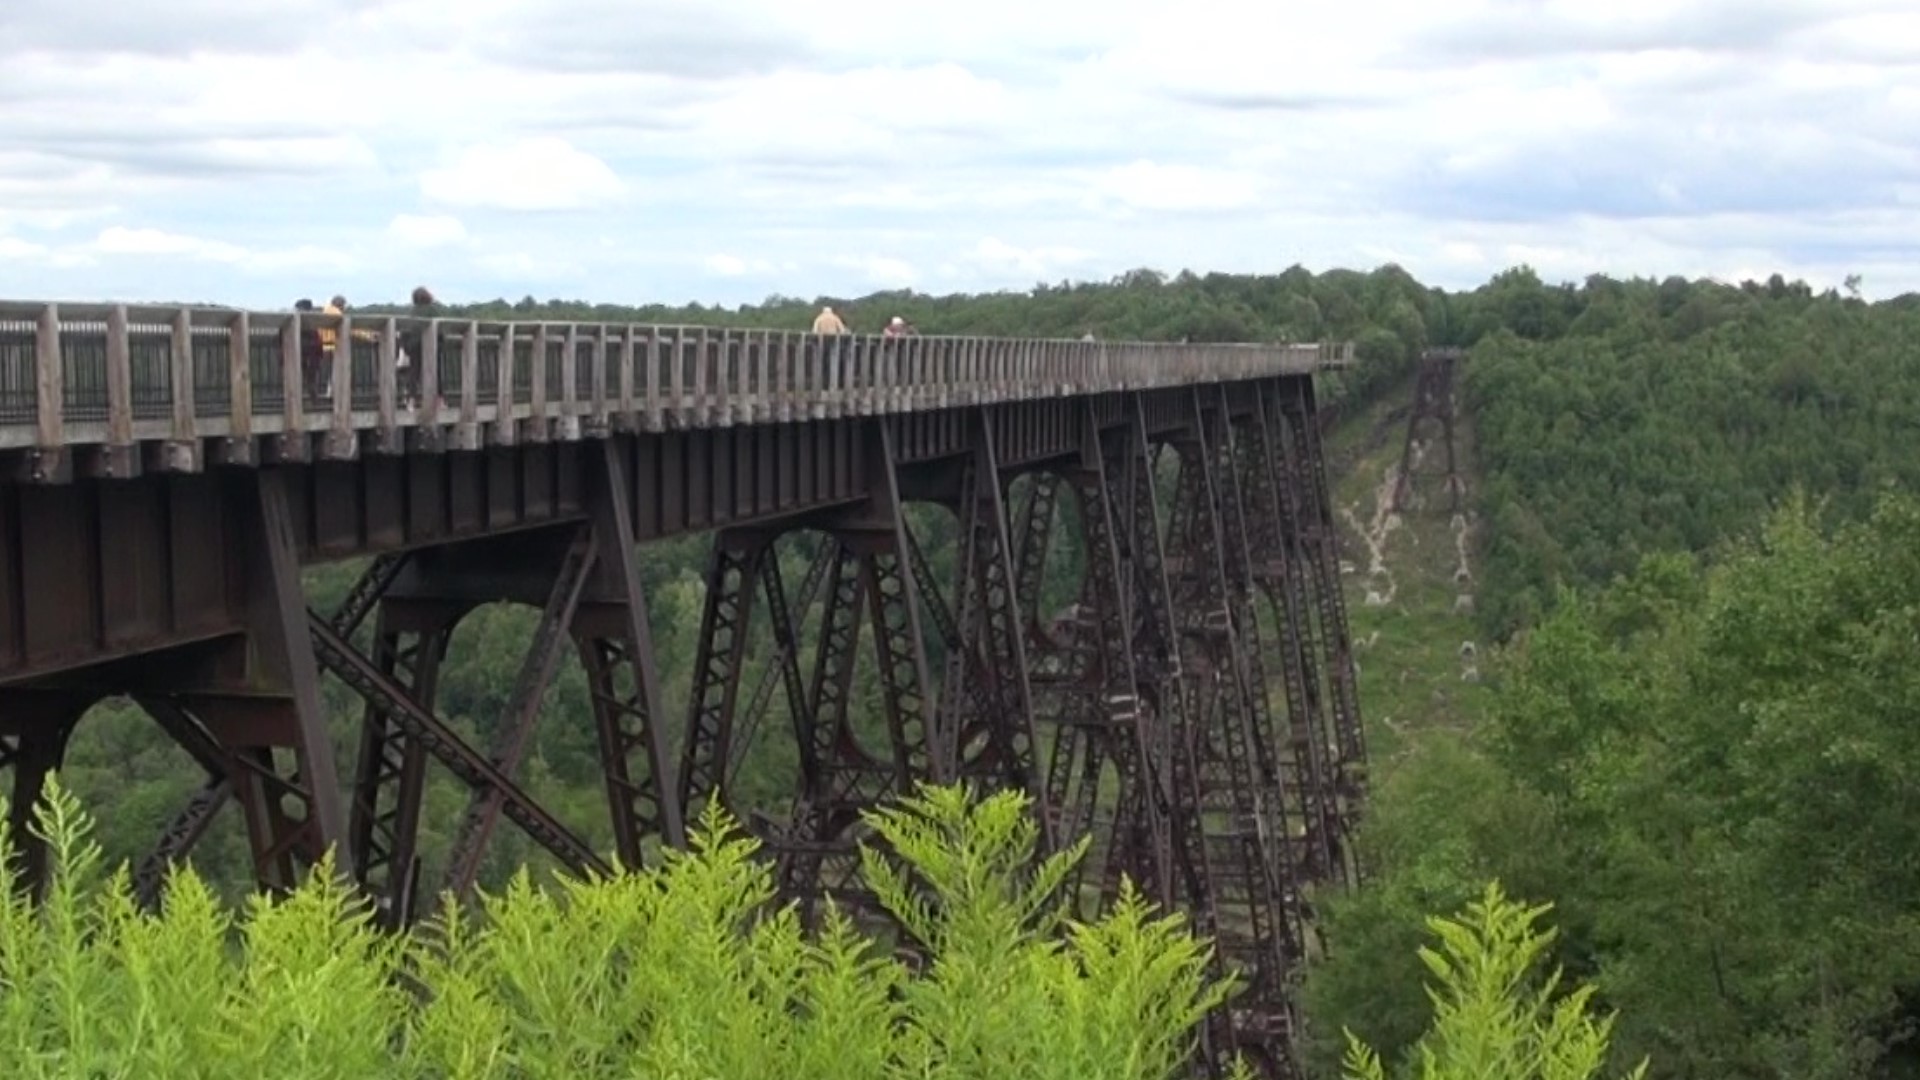 A bridge from the 1880s is still drawing tourists to Pennsylvania, even though part of it was destroyed by wild weather.